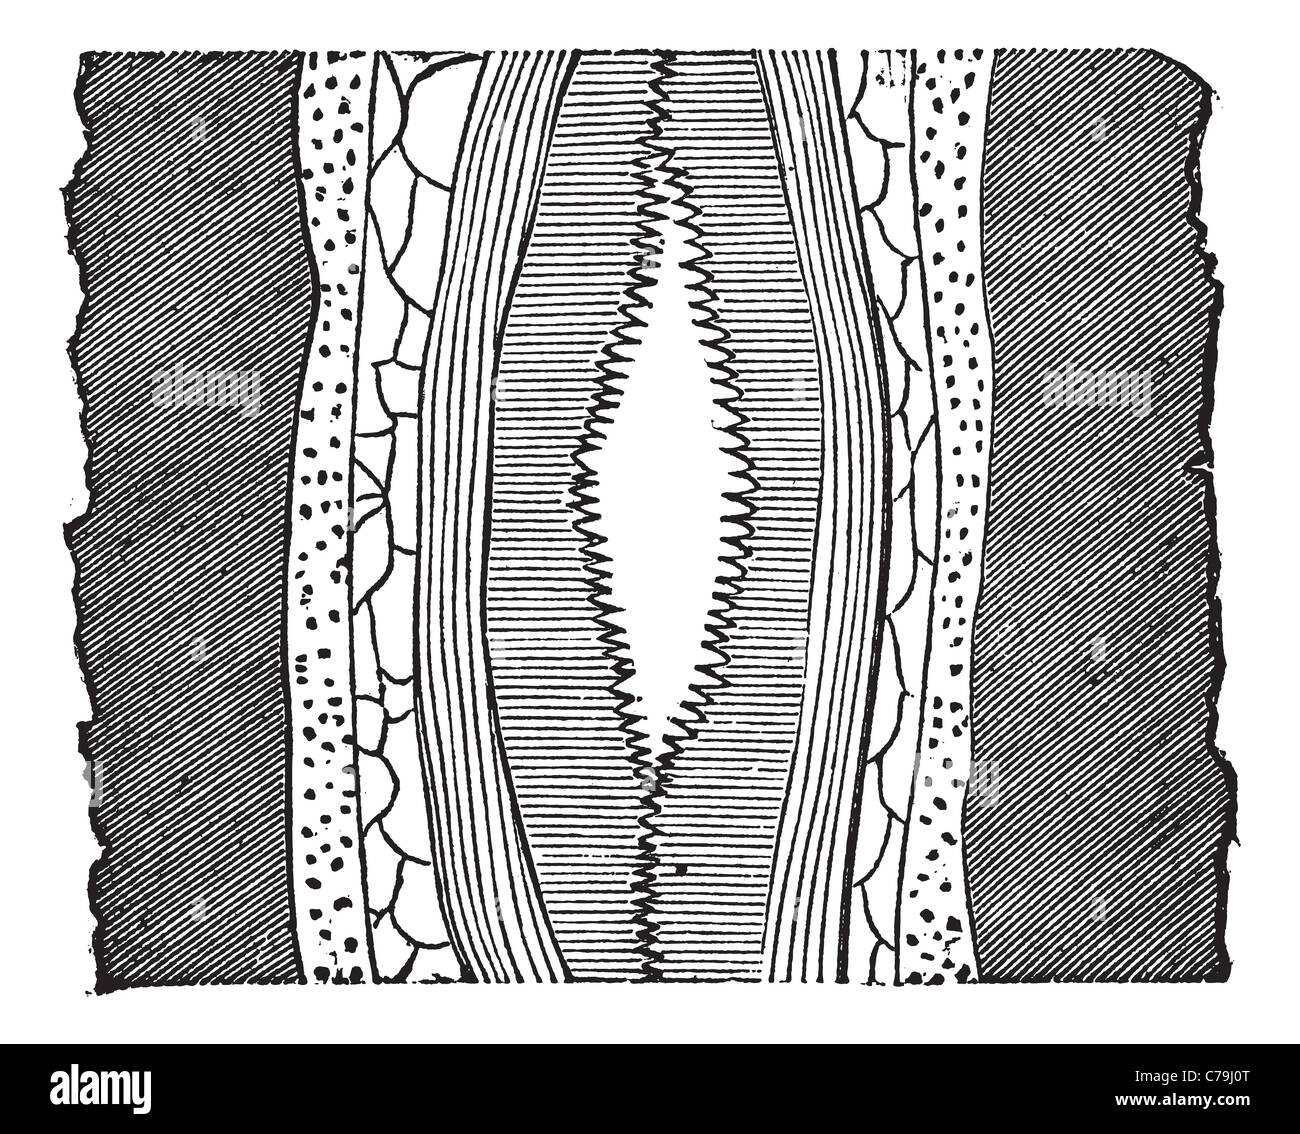 Geological Vein, illustration showing vein with cavity (center) splitting quartz into two portions. Stock Photo